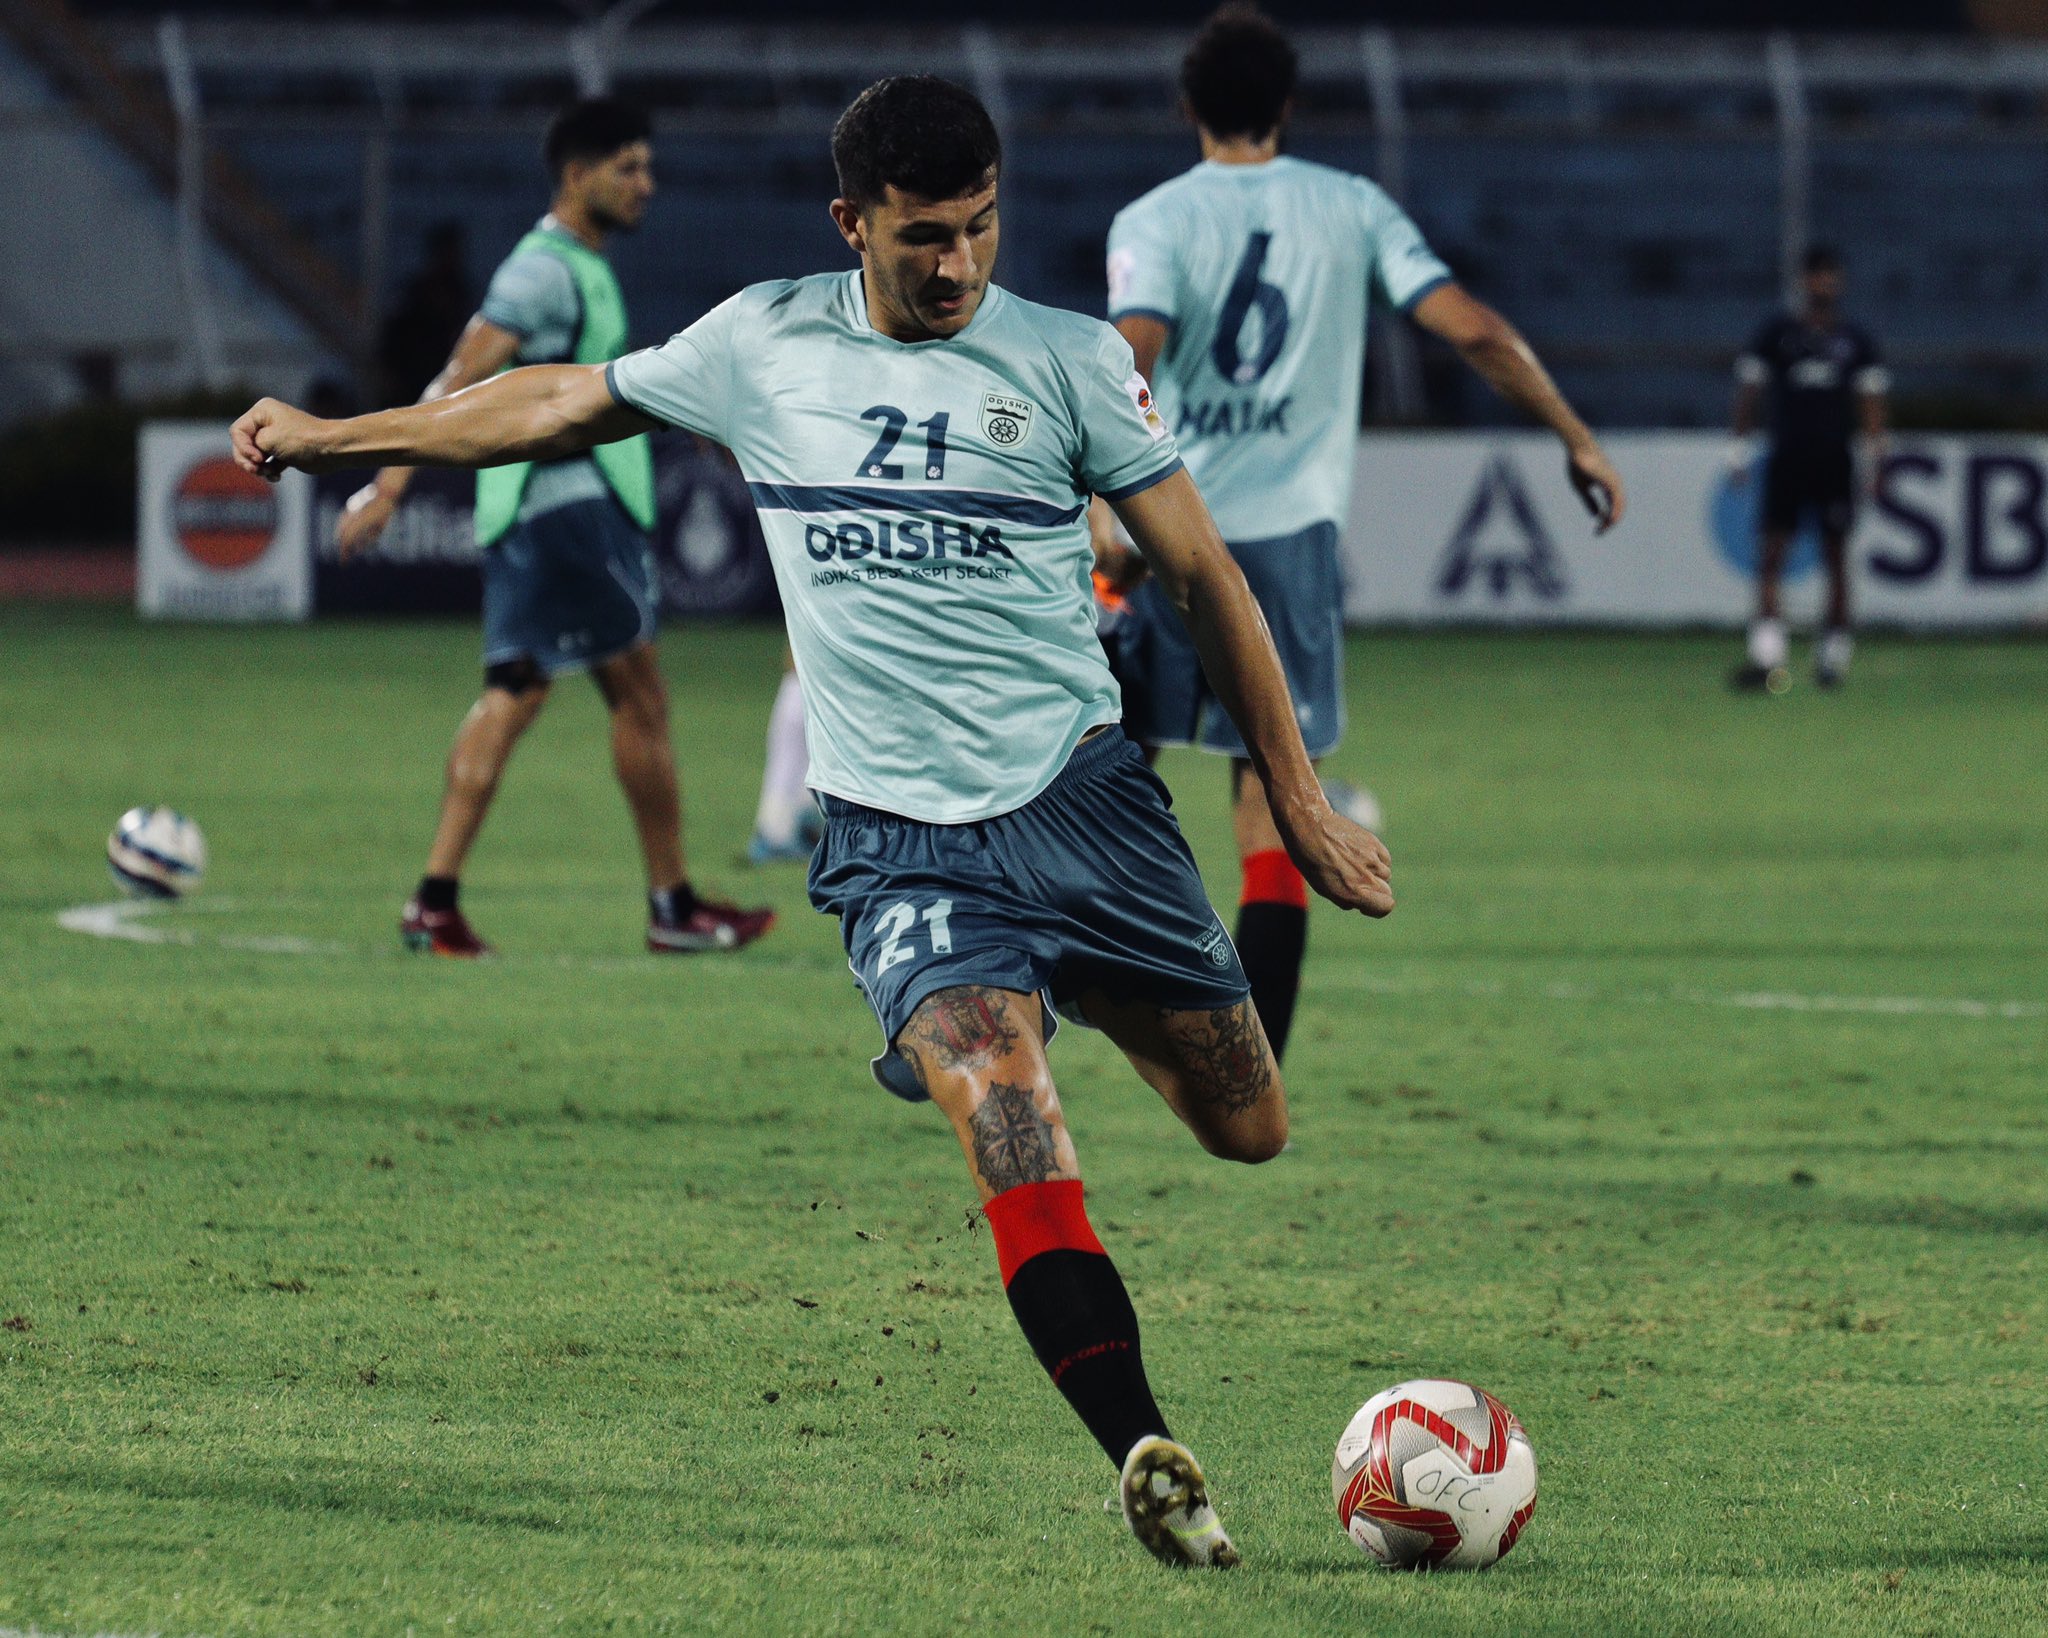 ISL 2022-23: From Carlos Delgado to Shubham Sarangi, FIVE players to watch out for as Josep Gombau's Odisha FC are en route REDEMPTION - Check Out